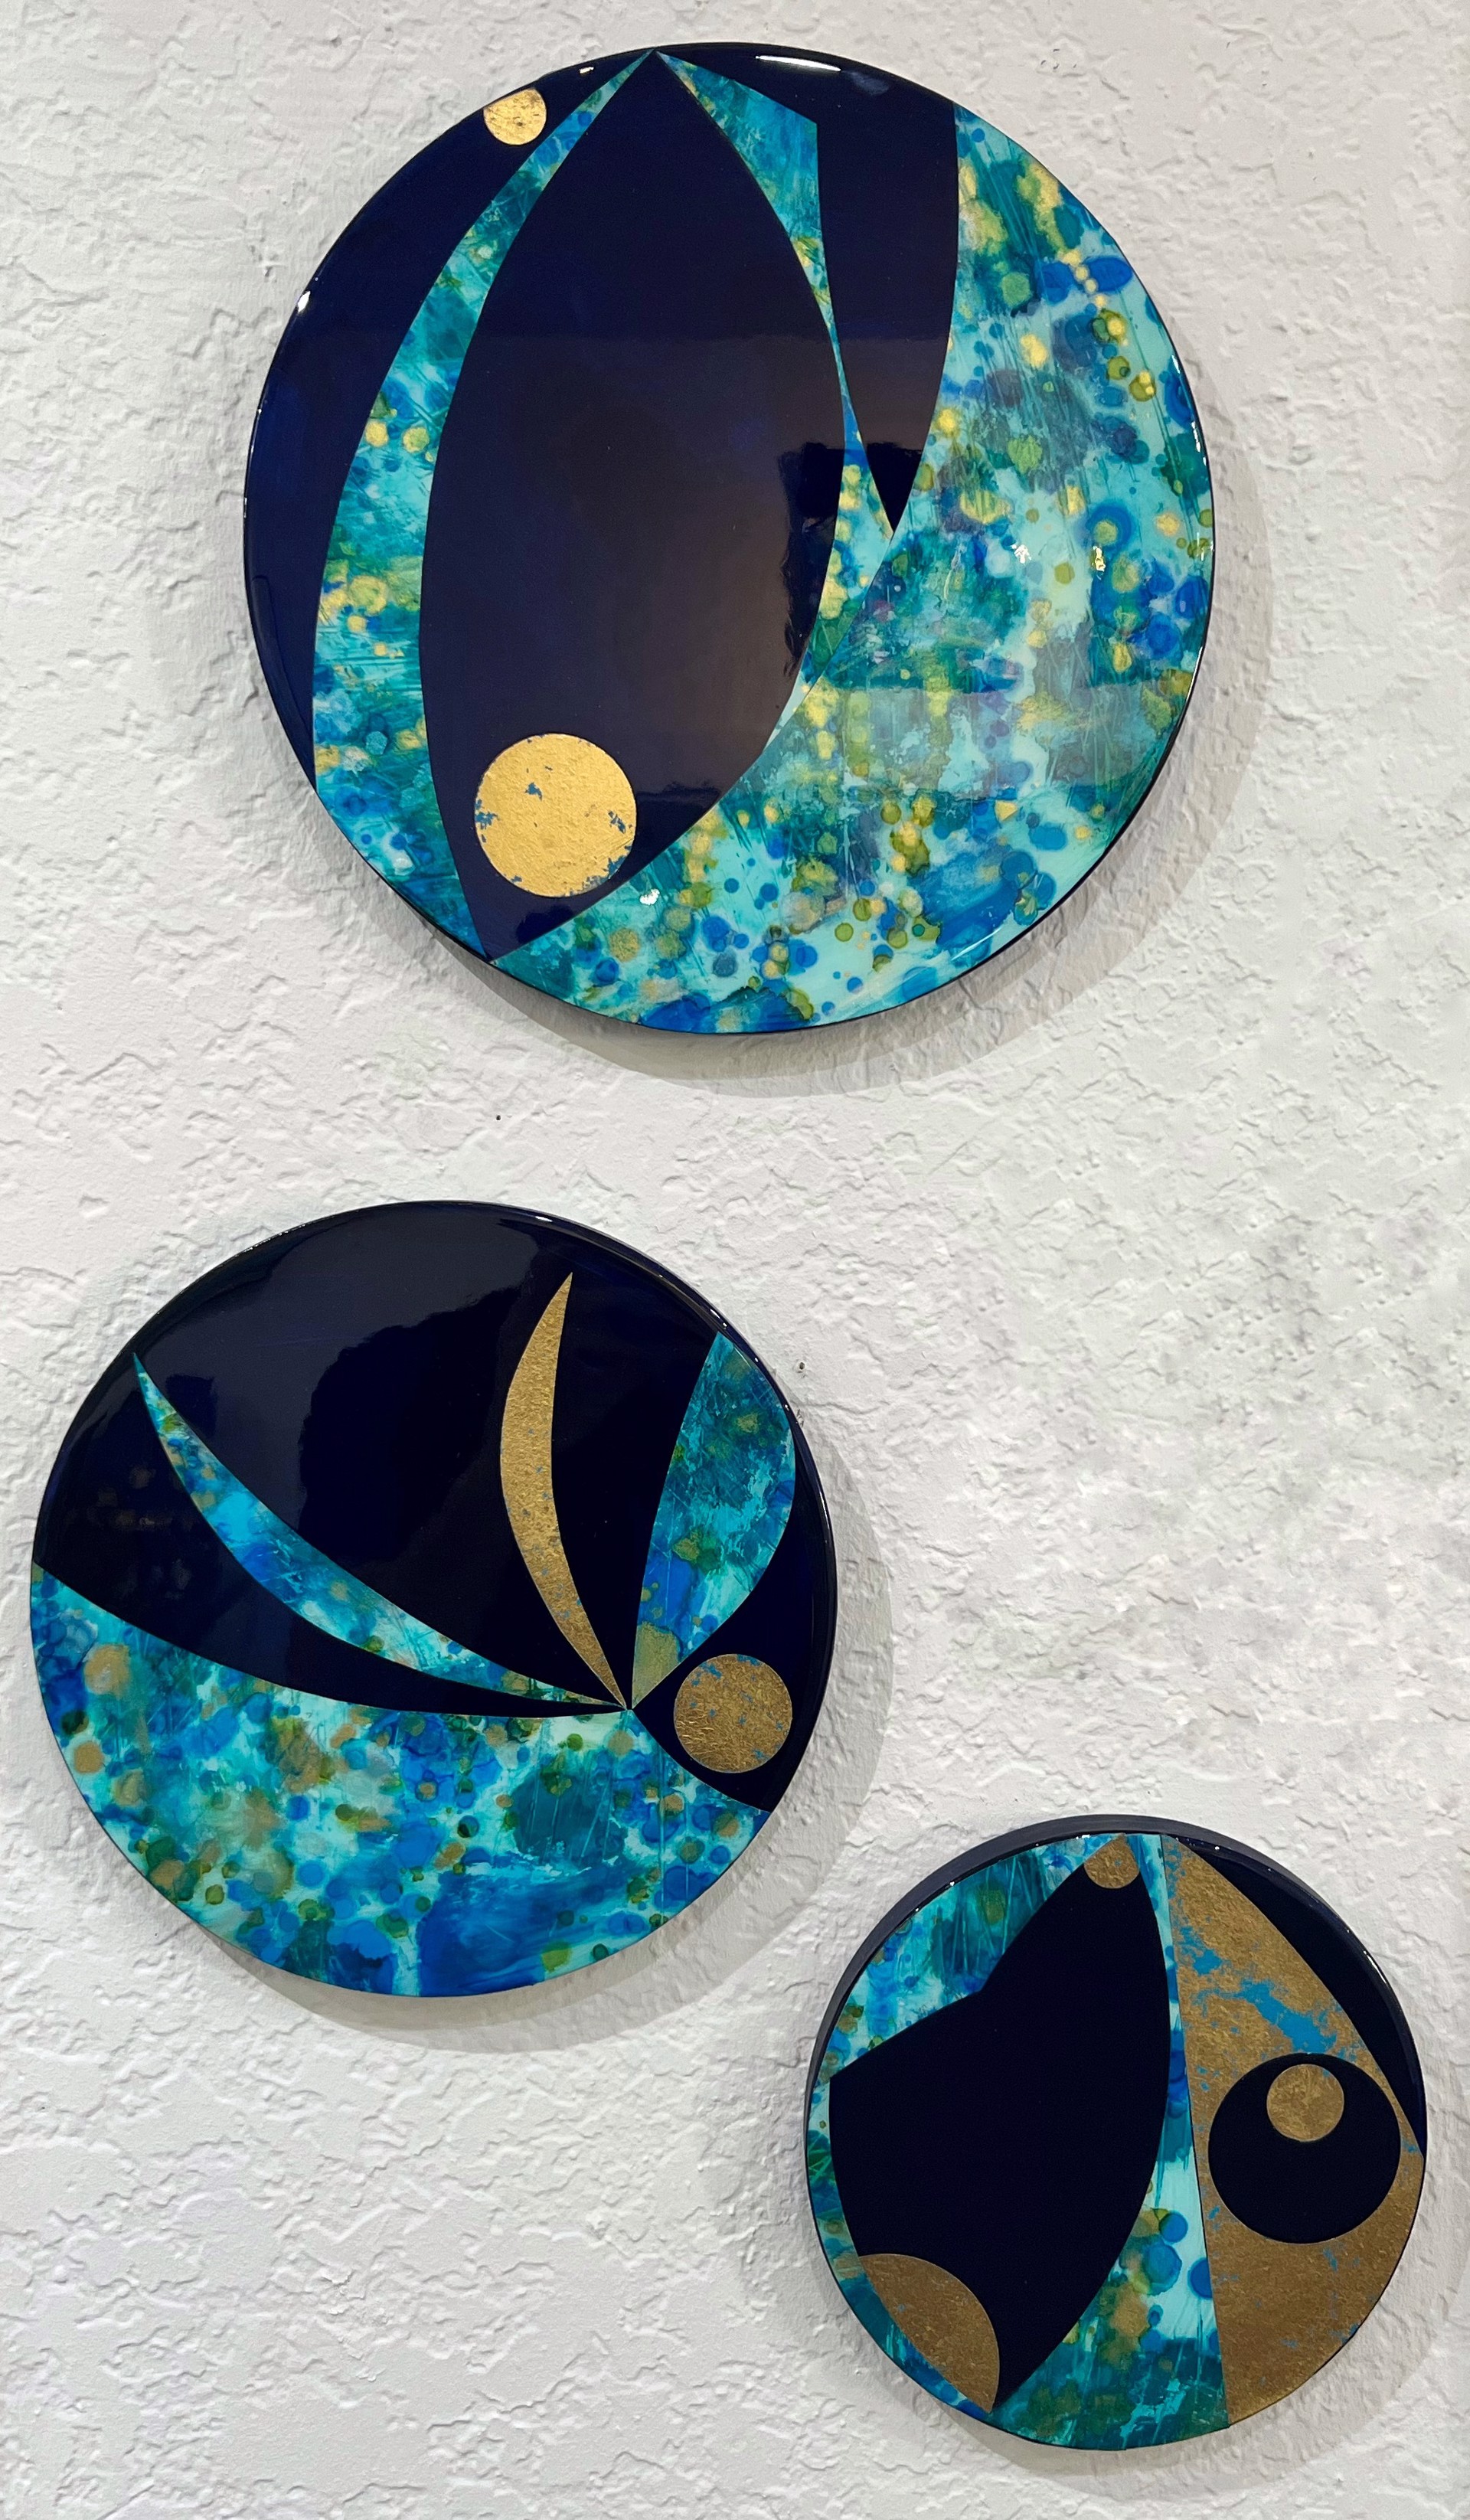 Blue Moons Triptych by Bettina Sego